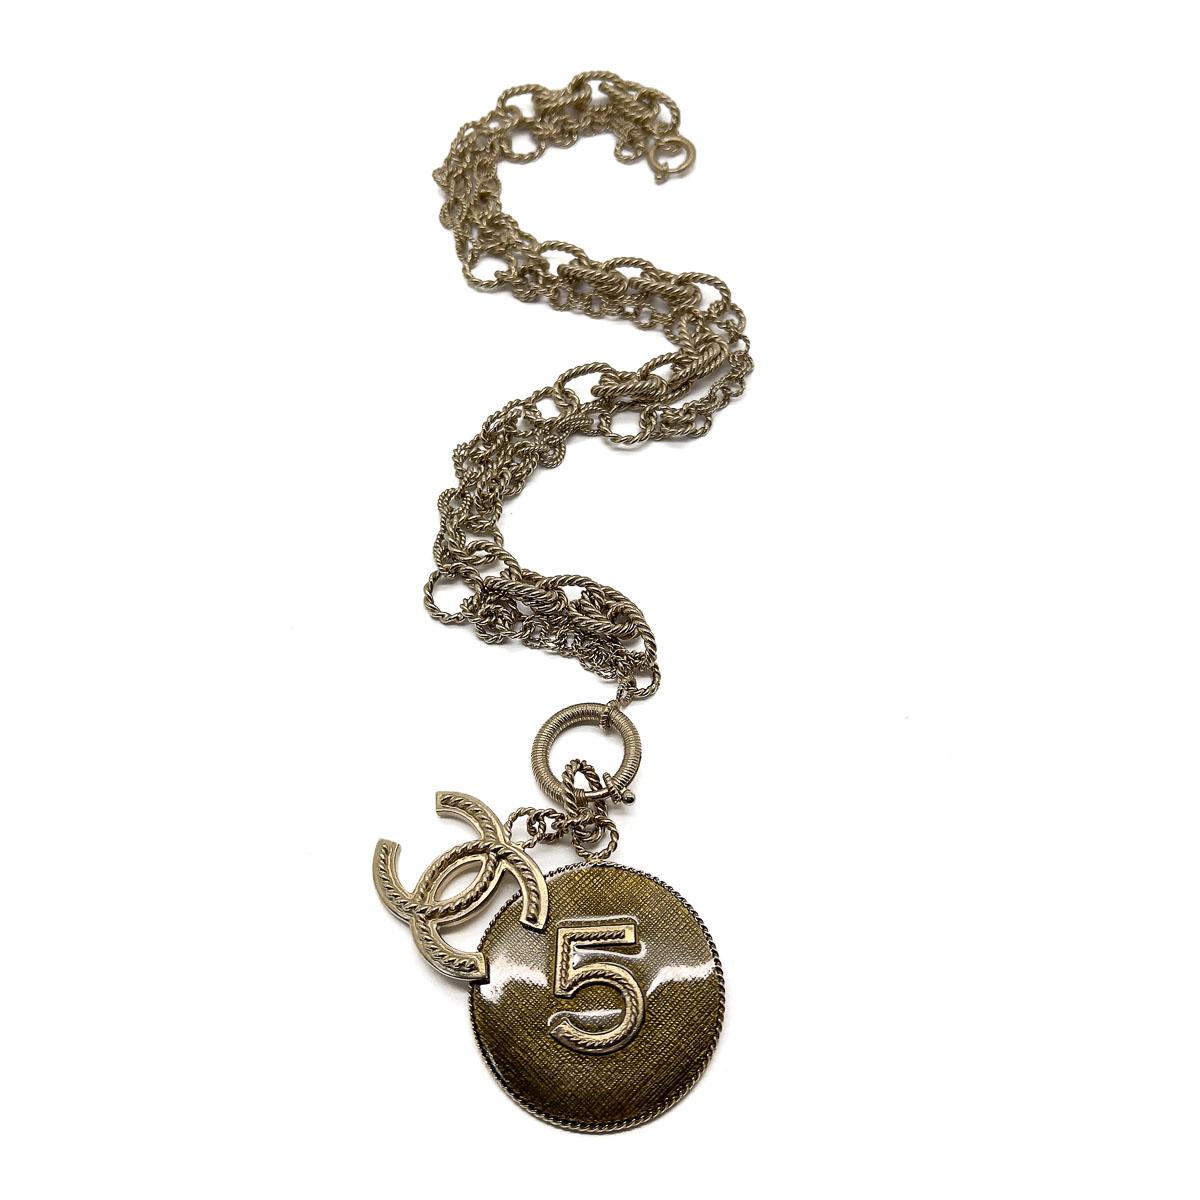 Women's Vintage Chanel Statement No. 5 Rope Chain Charm Necklace 2013 For Sale